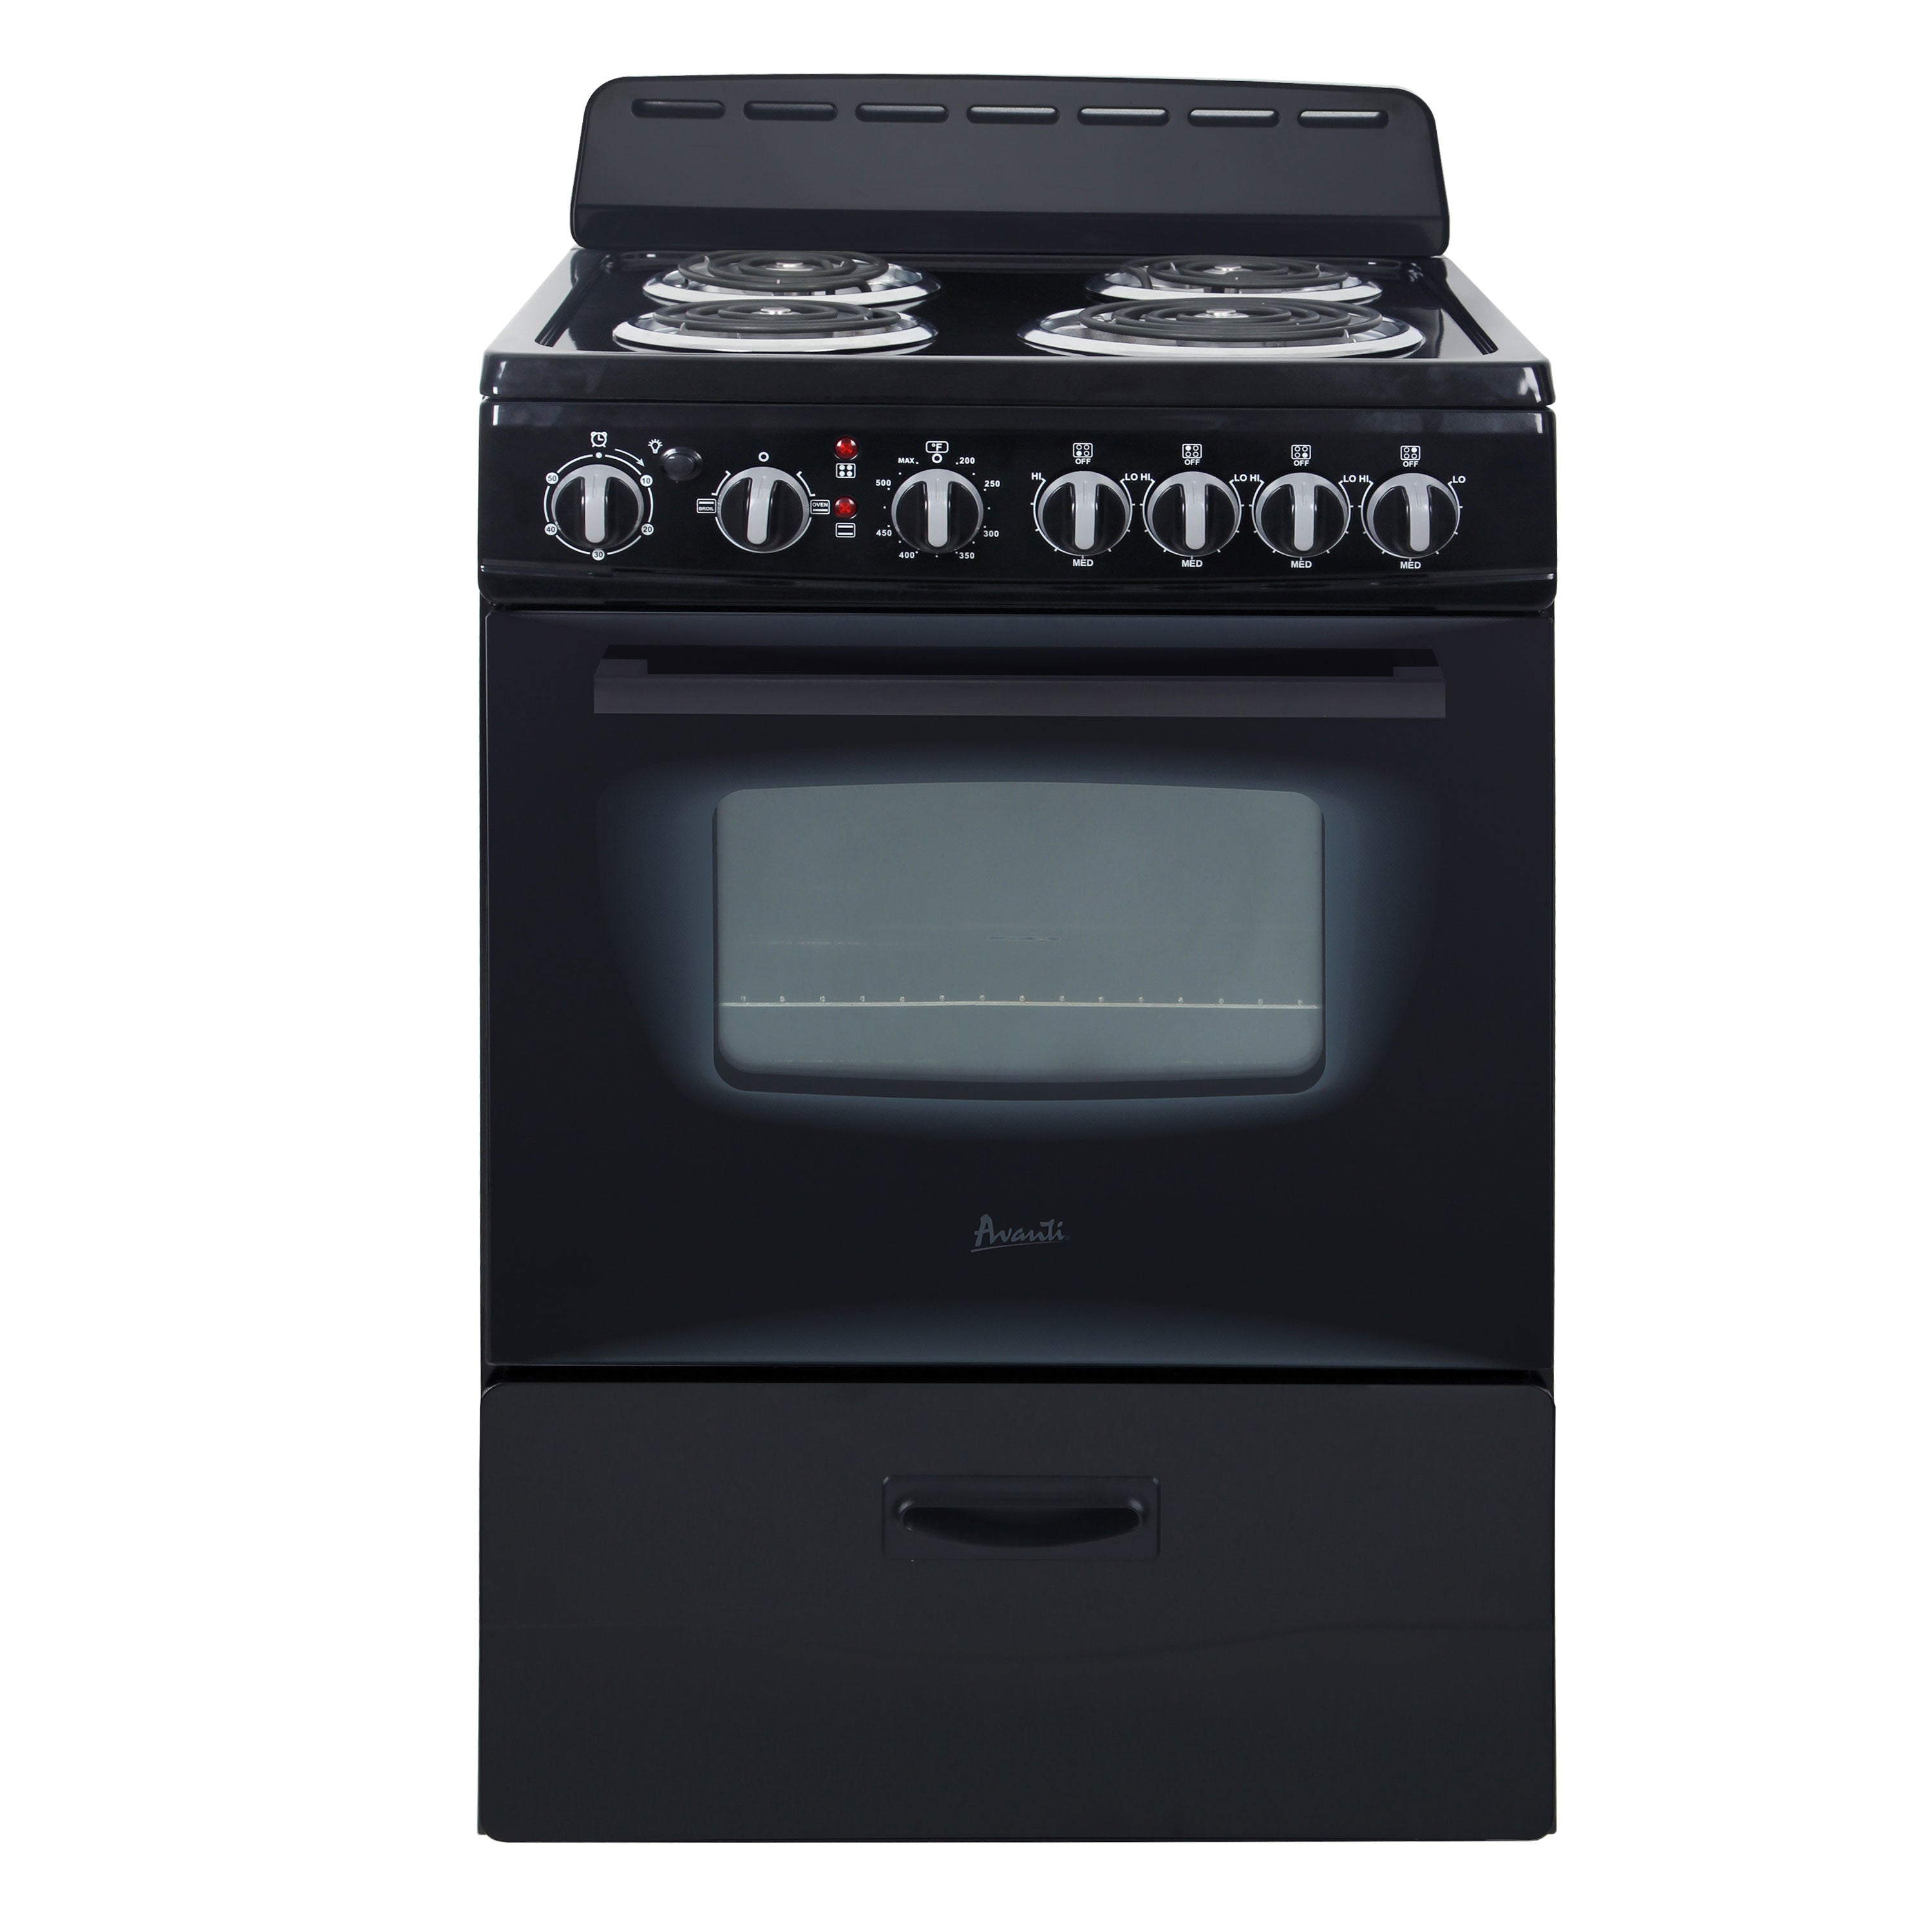 ER1 24 Electric Range in Stainless Steel